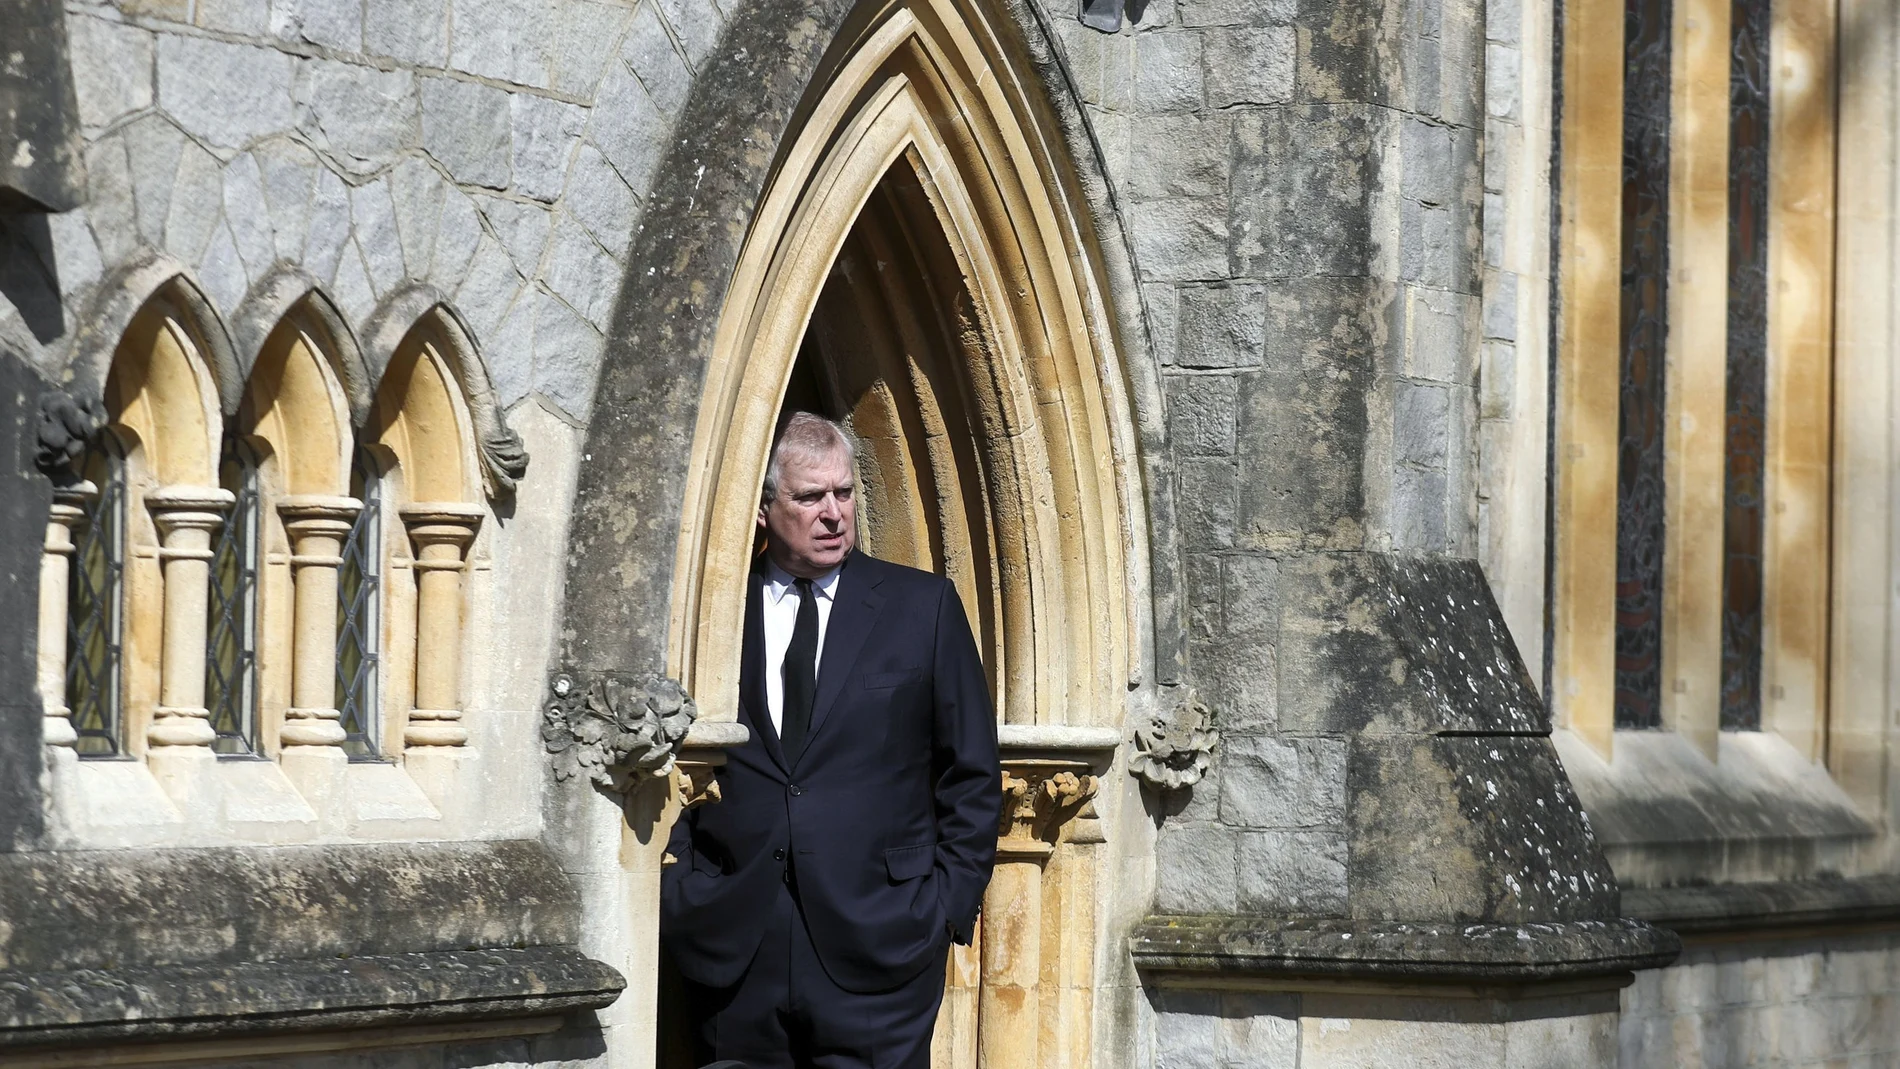 FILE - Britain's Prince Andrew attends the Sunday service at the Royal Chapel of All Saints at Royal Lodge, Windsor, following the death announcement of his father, Prince Philip, in England, Sunday, April 11, 2021.  U.S. District Judge Lewis A. Kaplan gave the green light Wednesday, Jan. 12, 2022 to a lawsuit against Prince Andrew by Virginia Giuffre,  who says he sexually abused her when she was 17. (Steve Parsons/Pool Photo via AP, File)